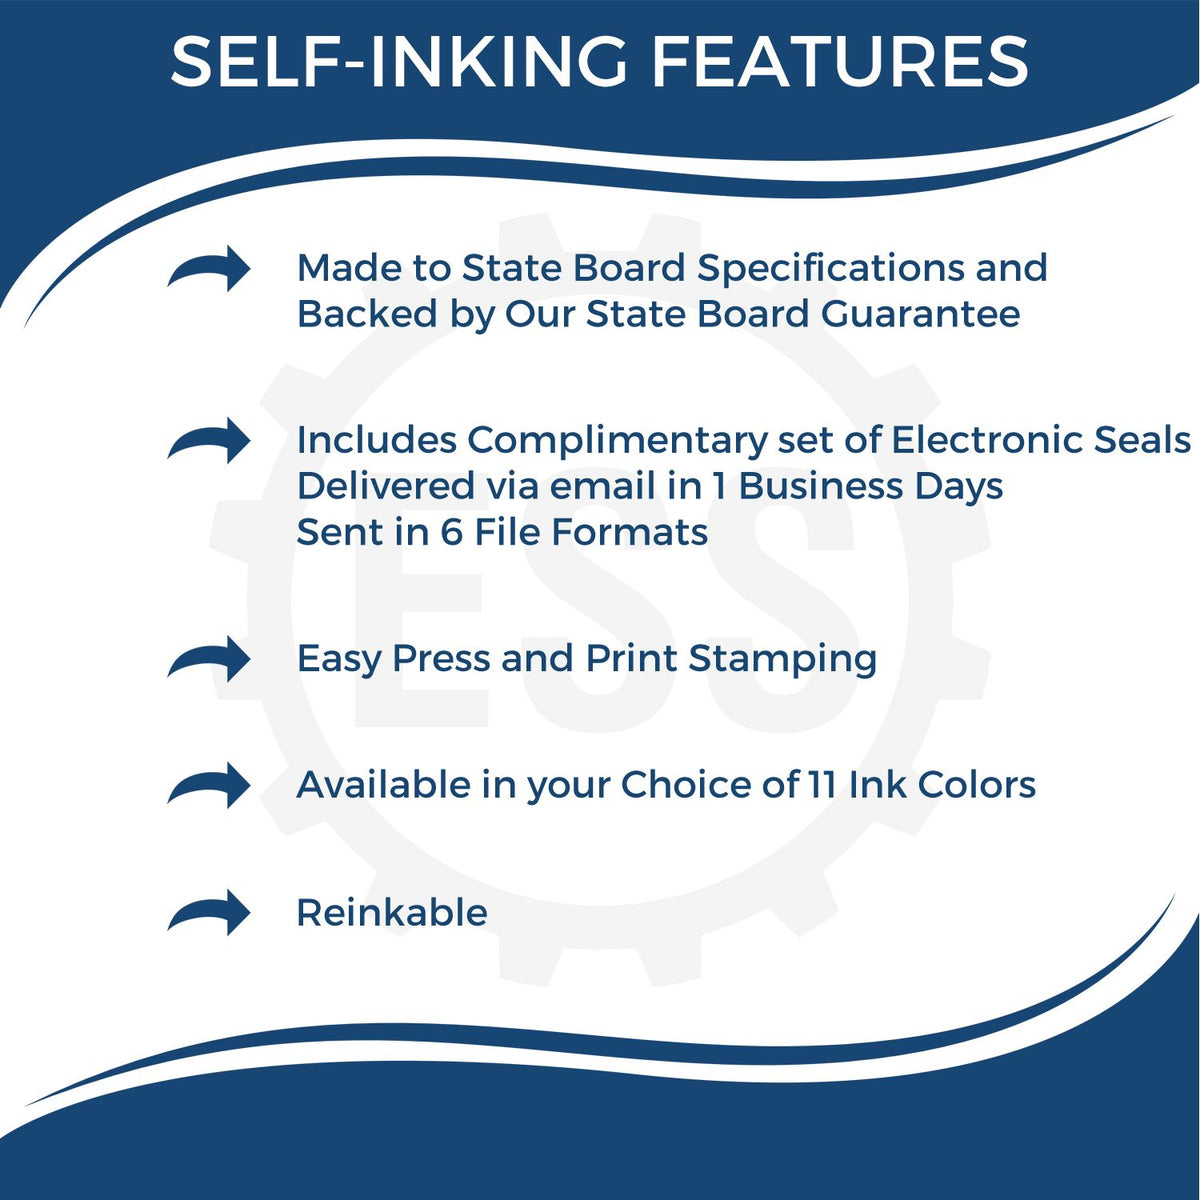 A picture of an infographic highlighting the selling points for the Self-Inking Hawaii Landscape Architect Stamp